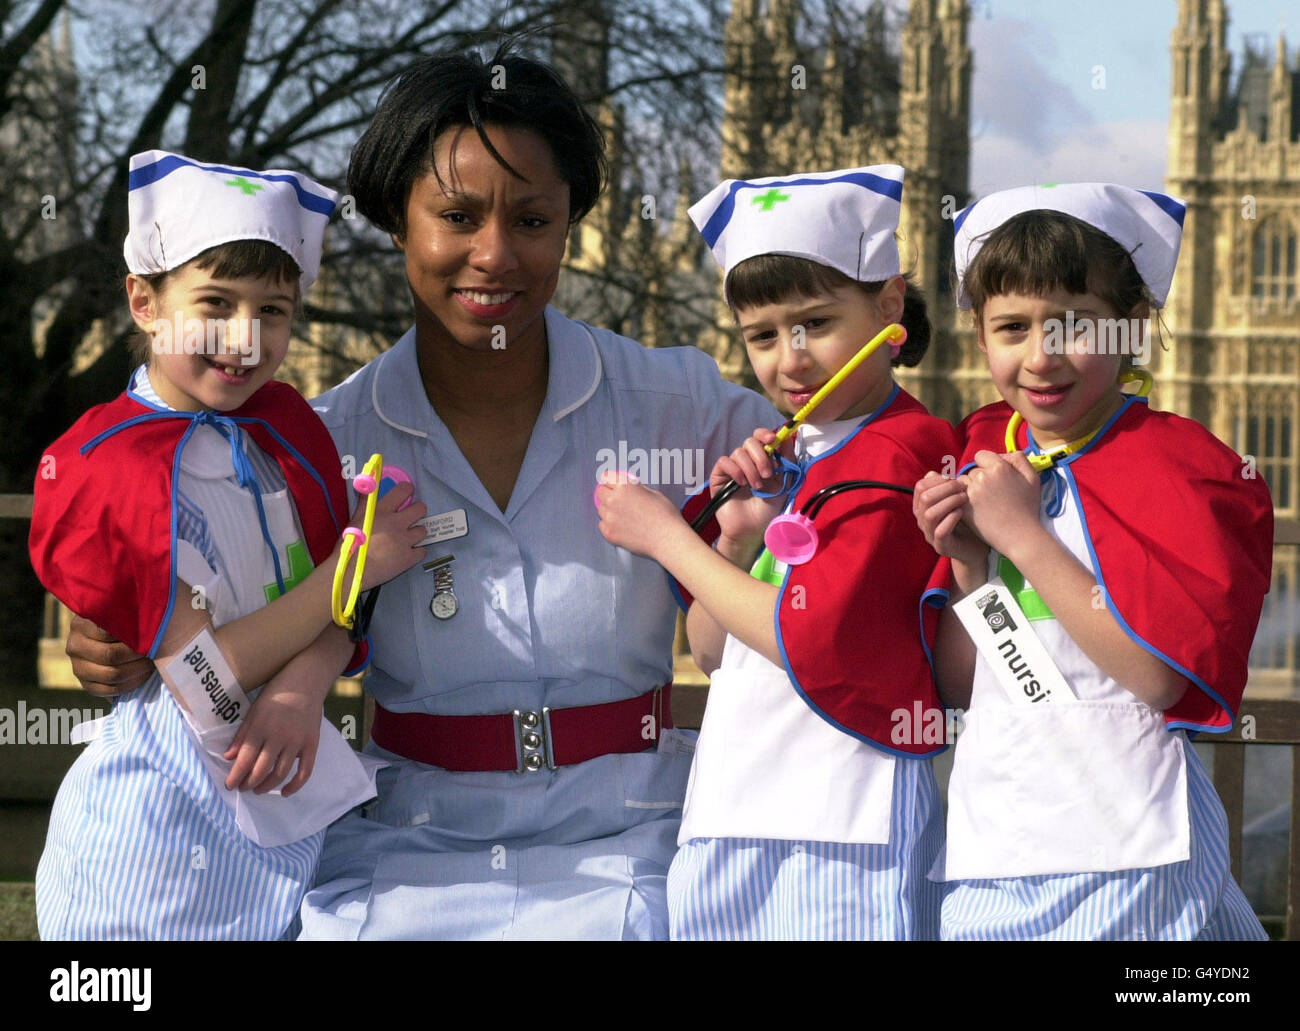 Paediatric Staff Nurse Pat Stanford with 7 year old triplets (L-R) Gabrielle, Alexandra and Eleanor Grant, from St. Albans, outside St Thomas' Hospital, London, where the Government announced a major recruitment drive in the NHS. * The three young girls from St Albans dressed up in nurses uniforms to demonstrate that the nursing profession is not dead. The drive will be accompanied by a high-profile advertising campaign. Stock Photo